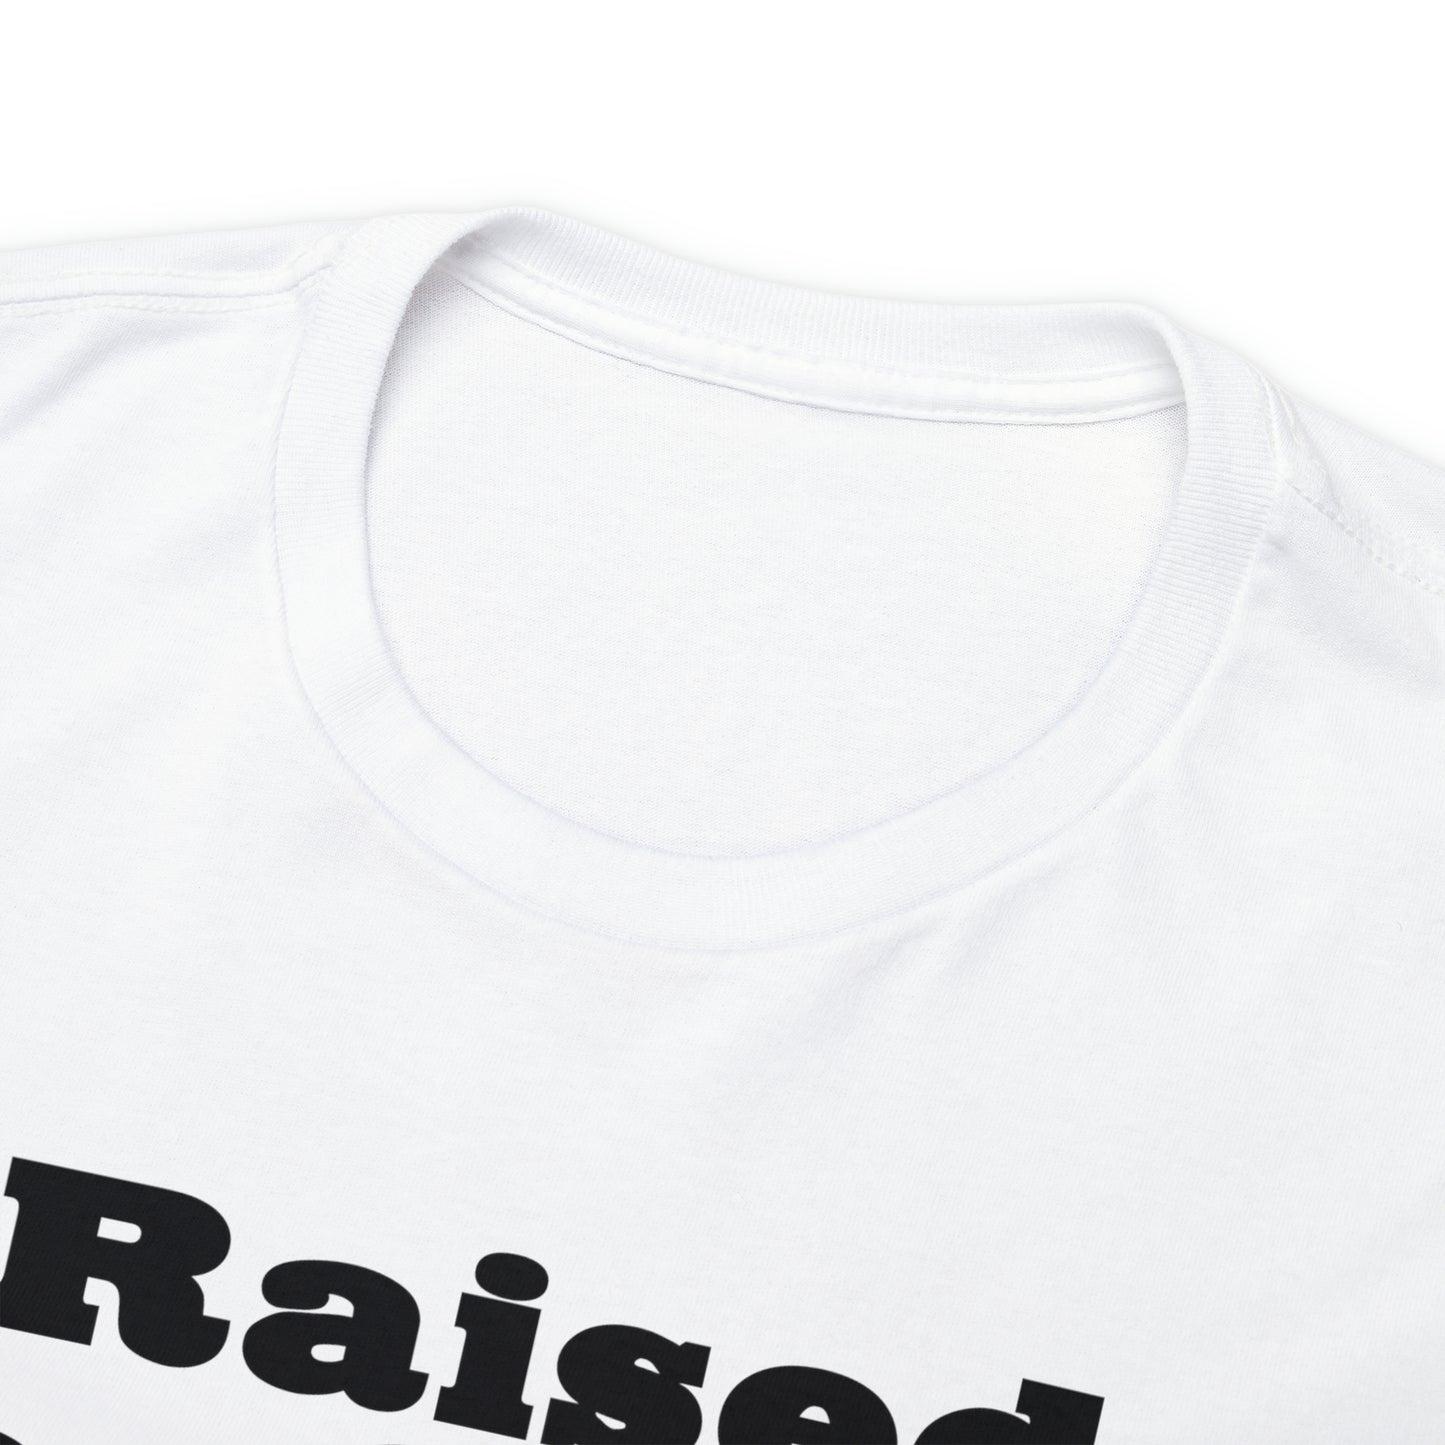 Raised on 90s Hip-Hop Shirt Great gift for a 90s Hip-Hop & Rap Lover T-Shirt